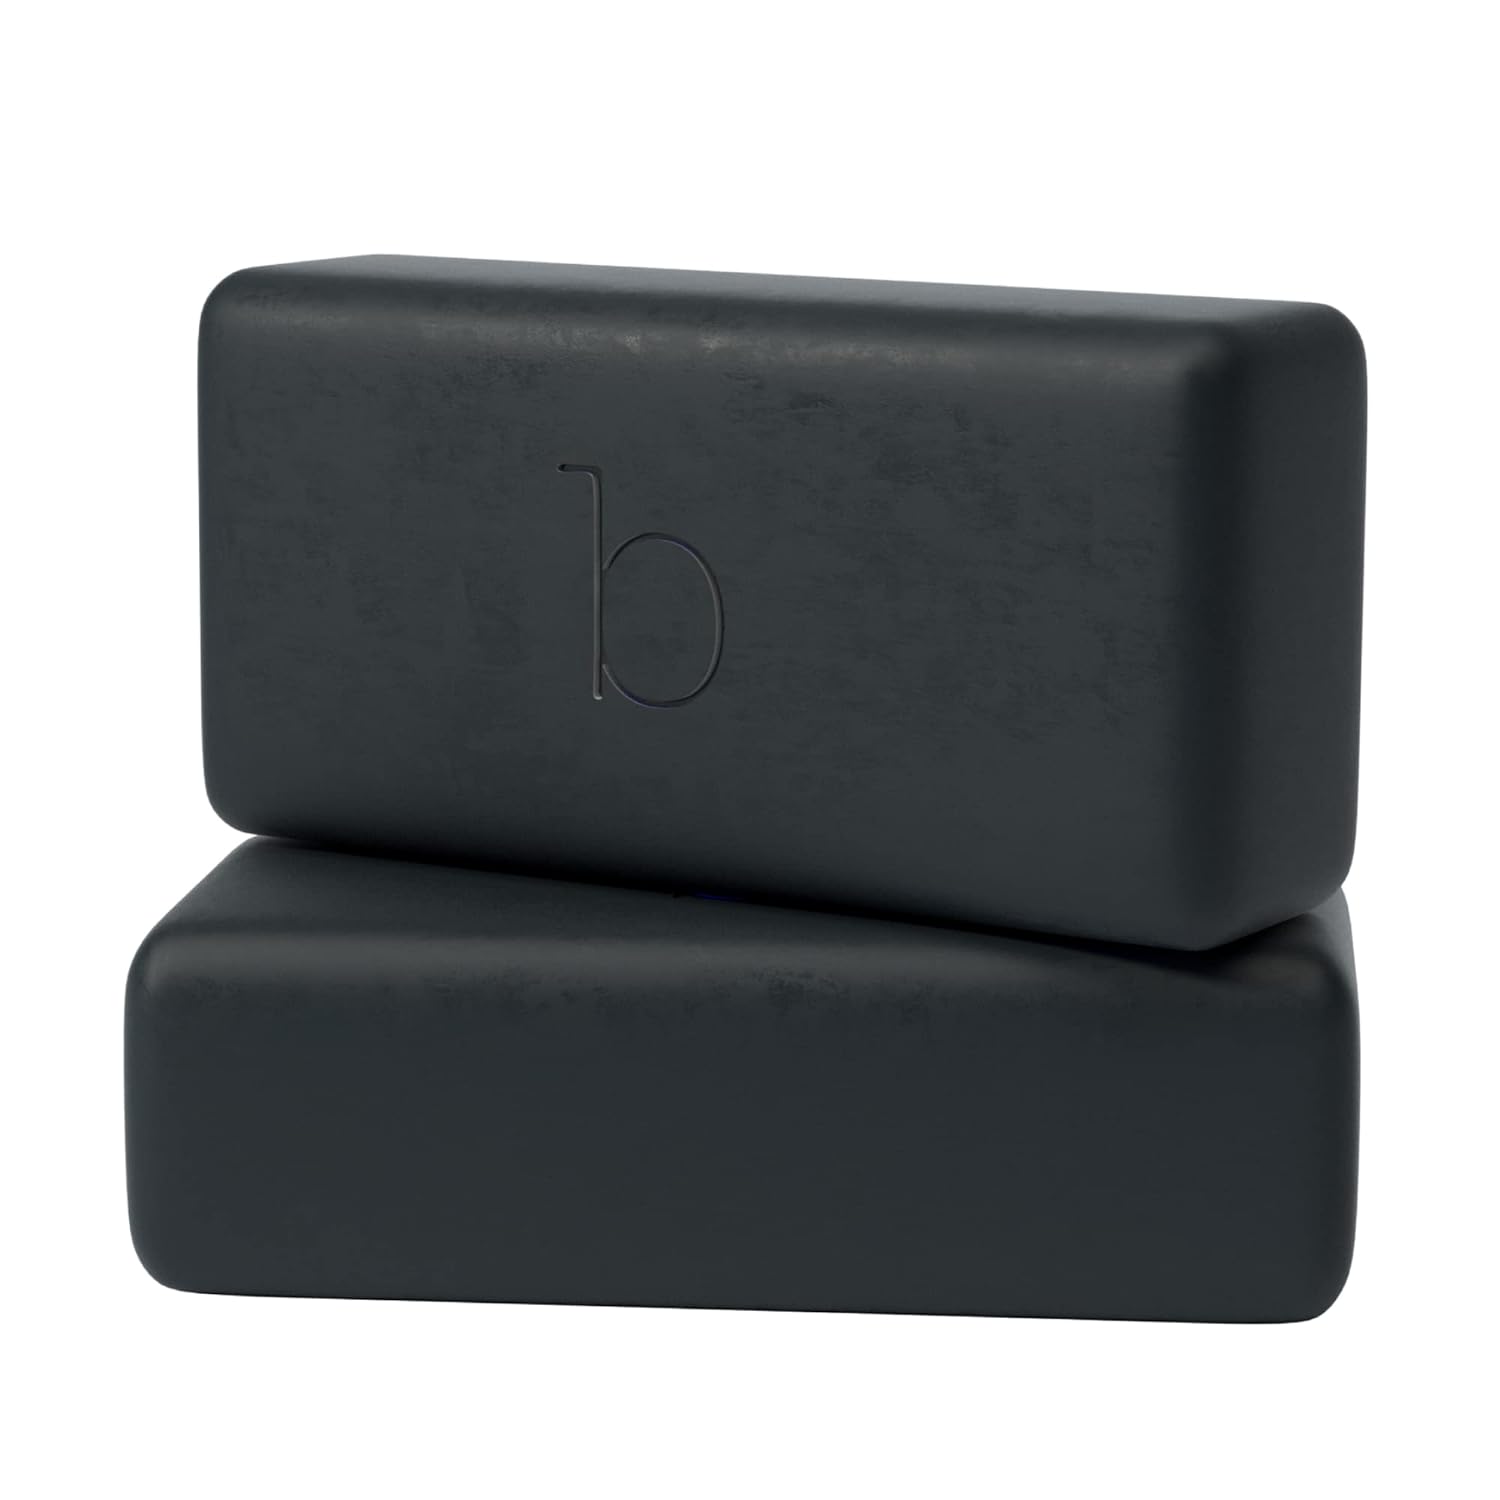 Buttah Skin by Dorion Renaud Black Gold Polishing Bar  2 Pack - Activated Charcoal Bar Soap - Skin Polishing Bar - African Cocoa Butter & Shea Butter Body Soap - Black Owned Skincare for Men/Women